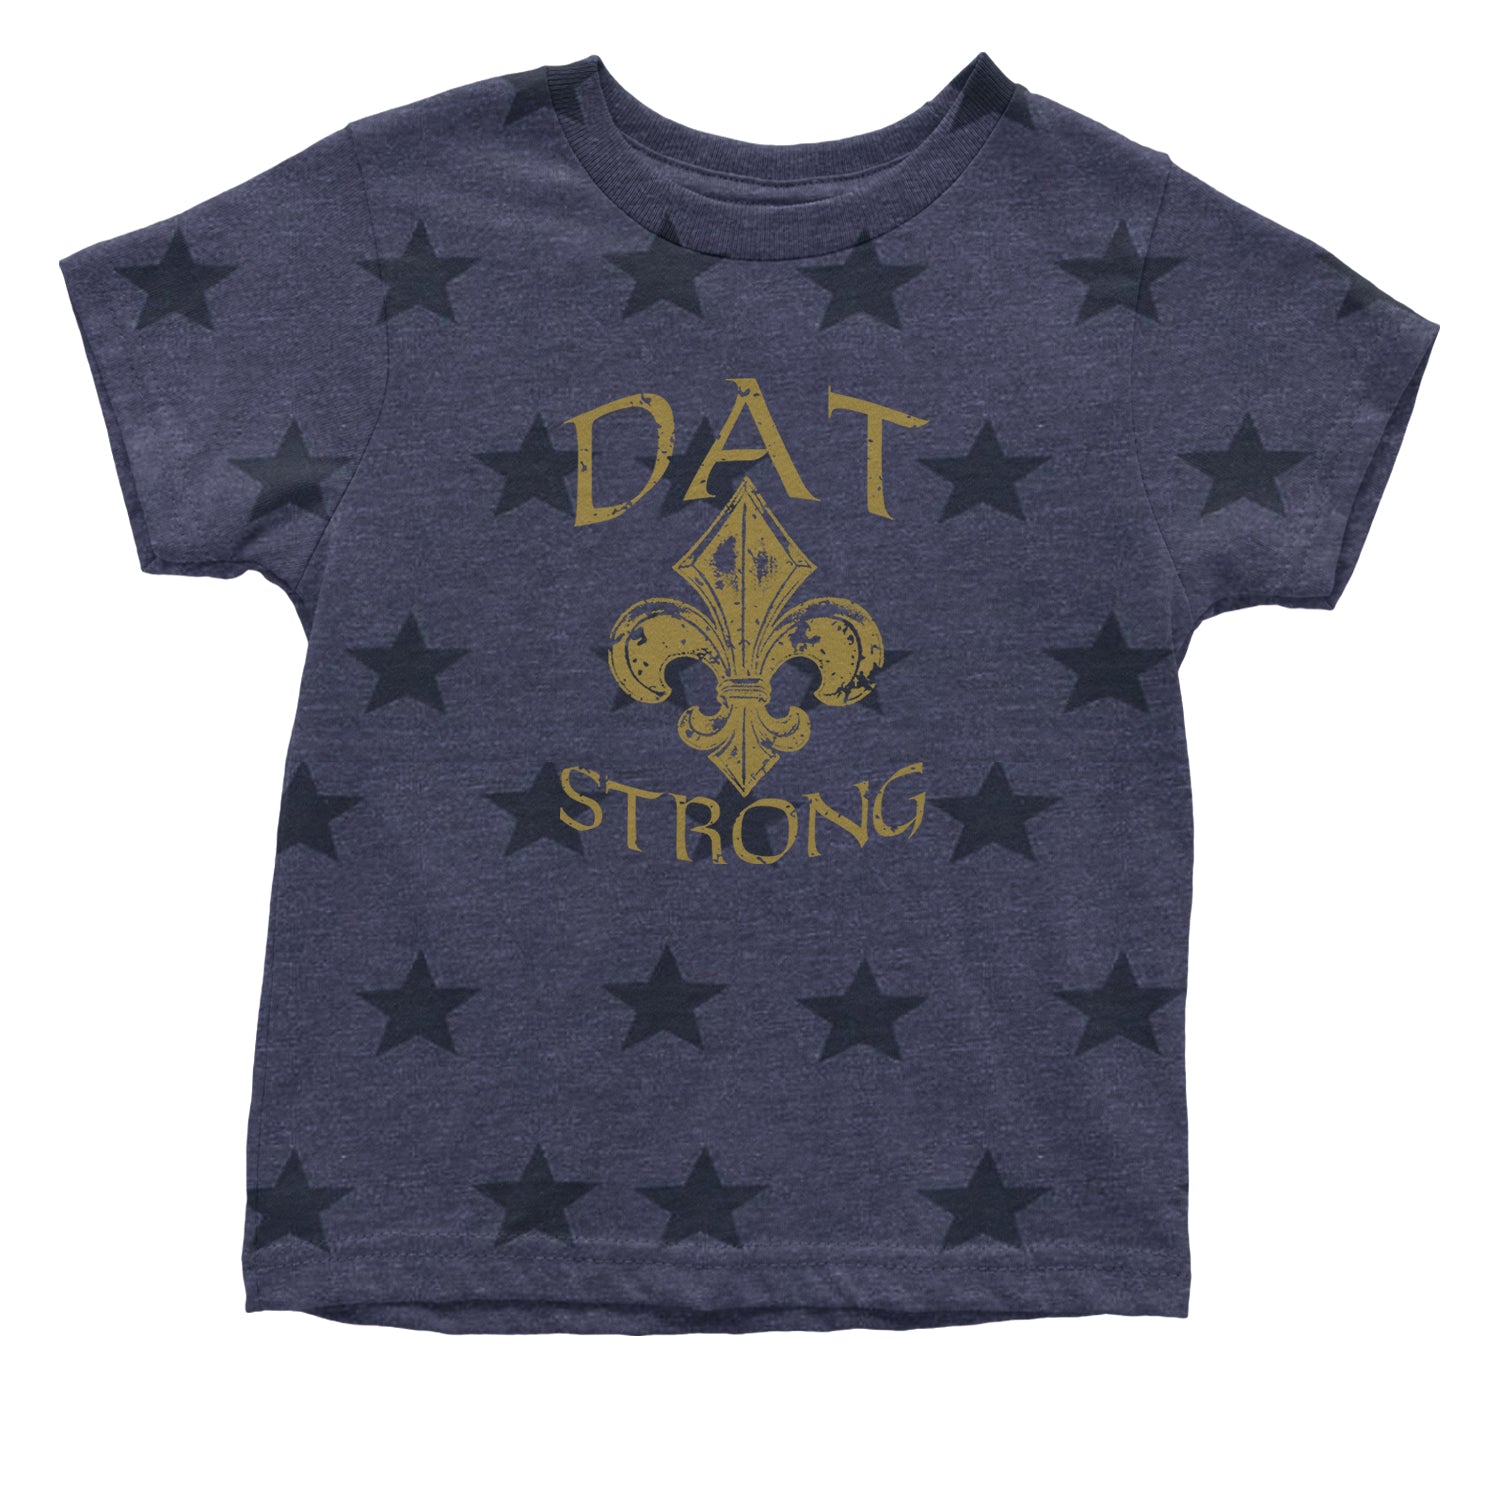 Dat Strong New Orleans Infant One-Piece Romper Bodysuit and Toddler T-shirt dat, de, fan, fleur, jersey, lis, new, orleans, sports, strong, who by Expression Tees